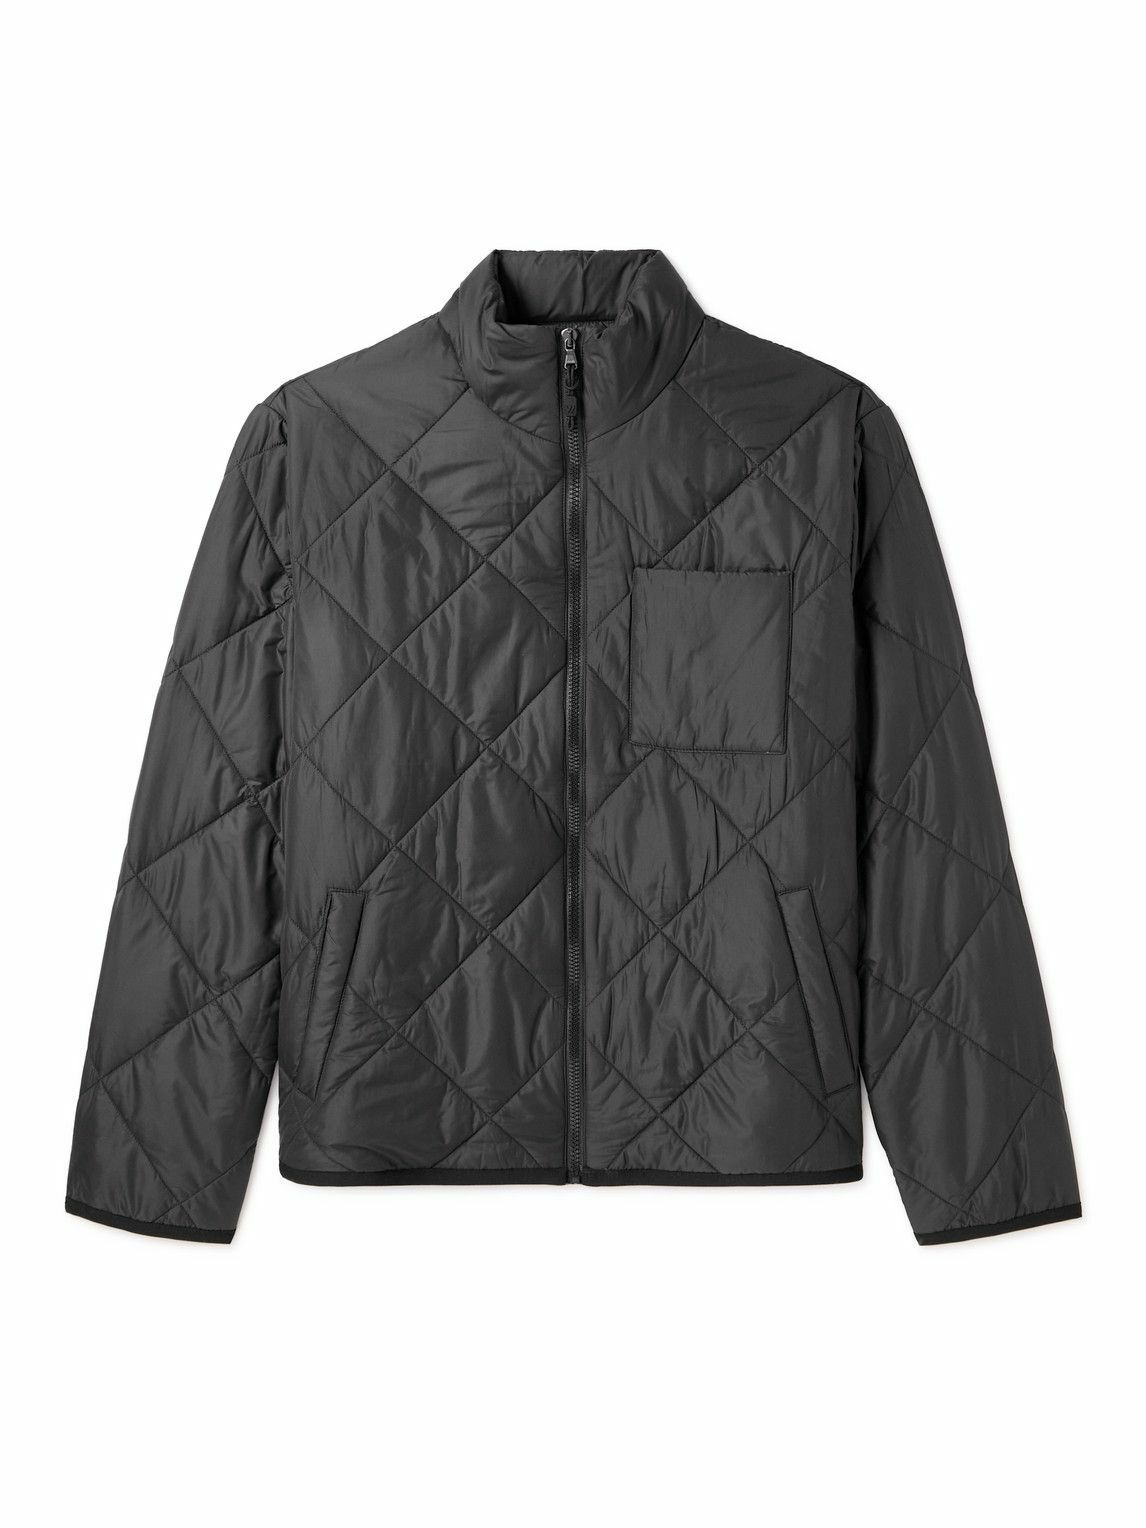 James Perse - Quilted Shell Jacket - Black James Perse